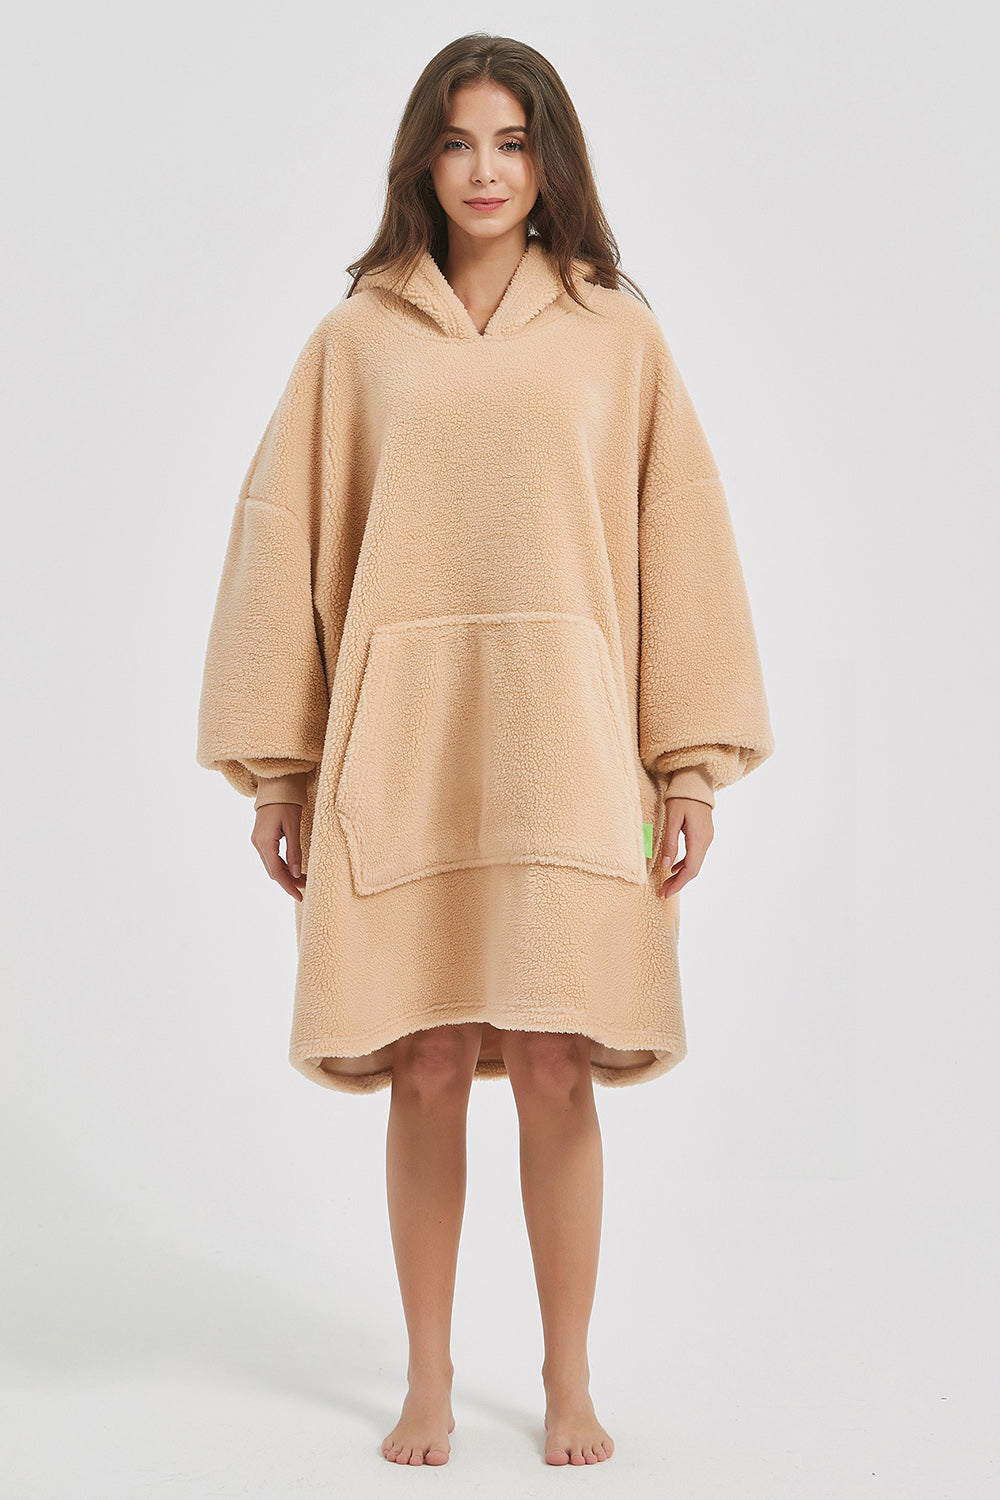 Lantern Sleeve Oversized Hooded Fuzzy Lounge Dress - Tophatter Deals and Online Shopping - Electronics, Jewelry, Beauty, Health, Gadgets, Fashion - Tophatter's Discounts & Offers - tophatters - tophatters.co